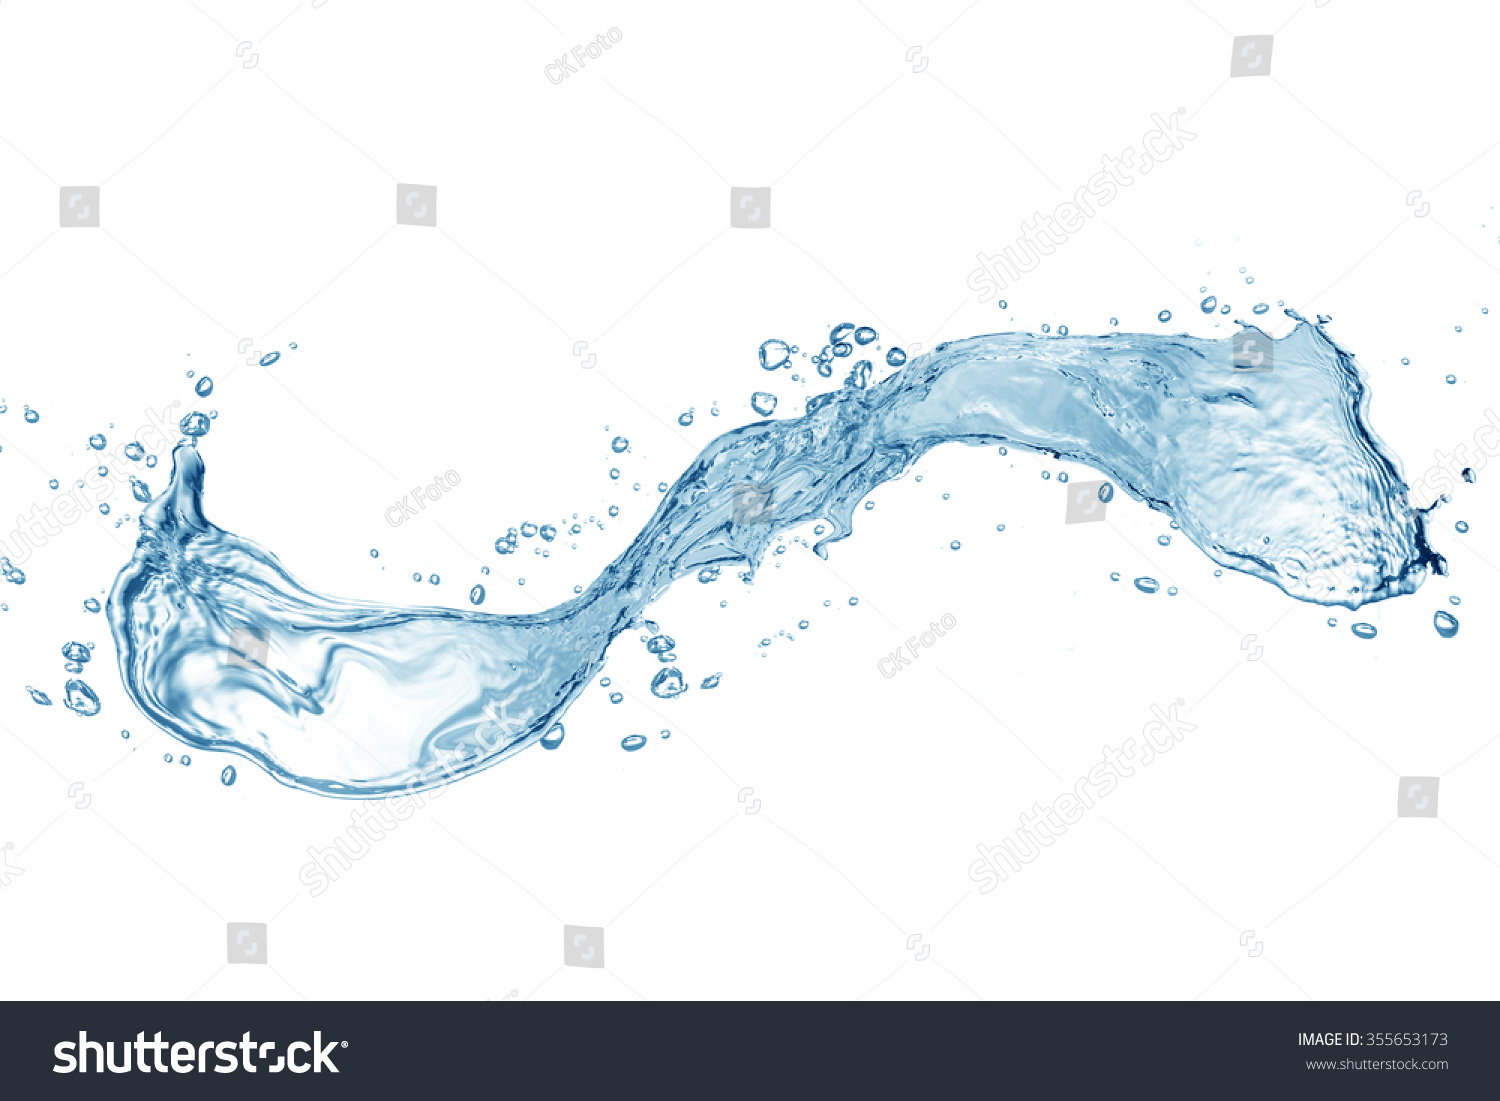 Water,water splash isolated on white background #355653173